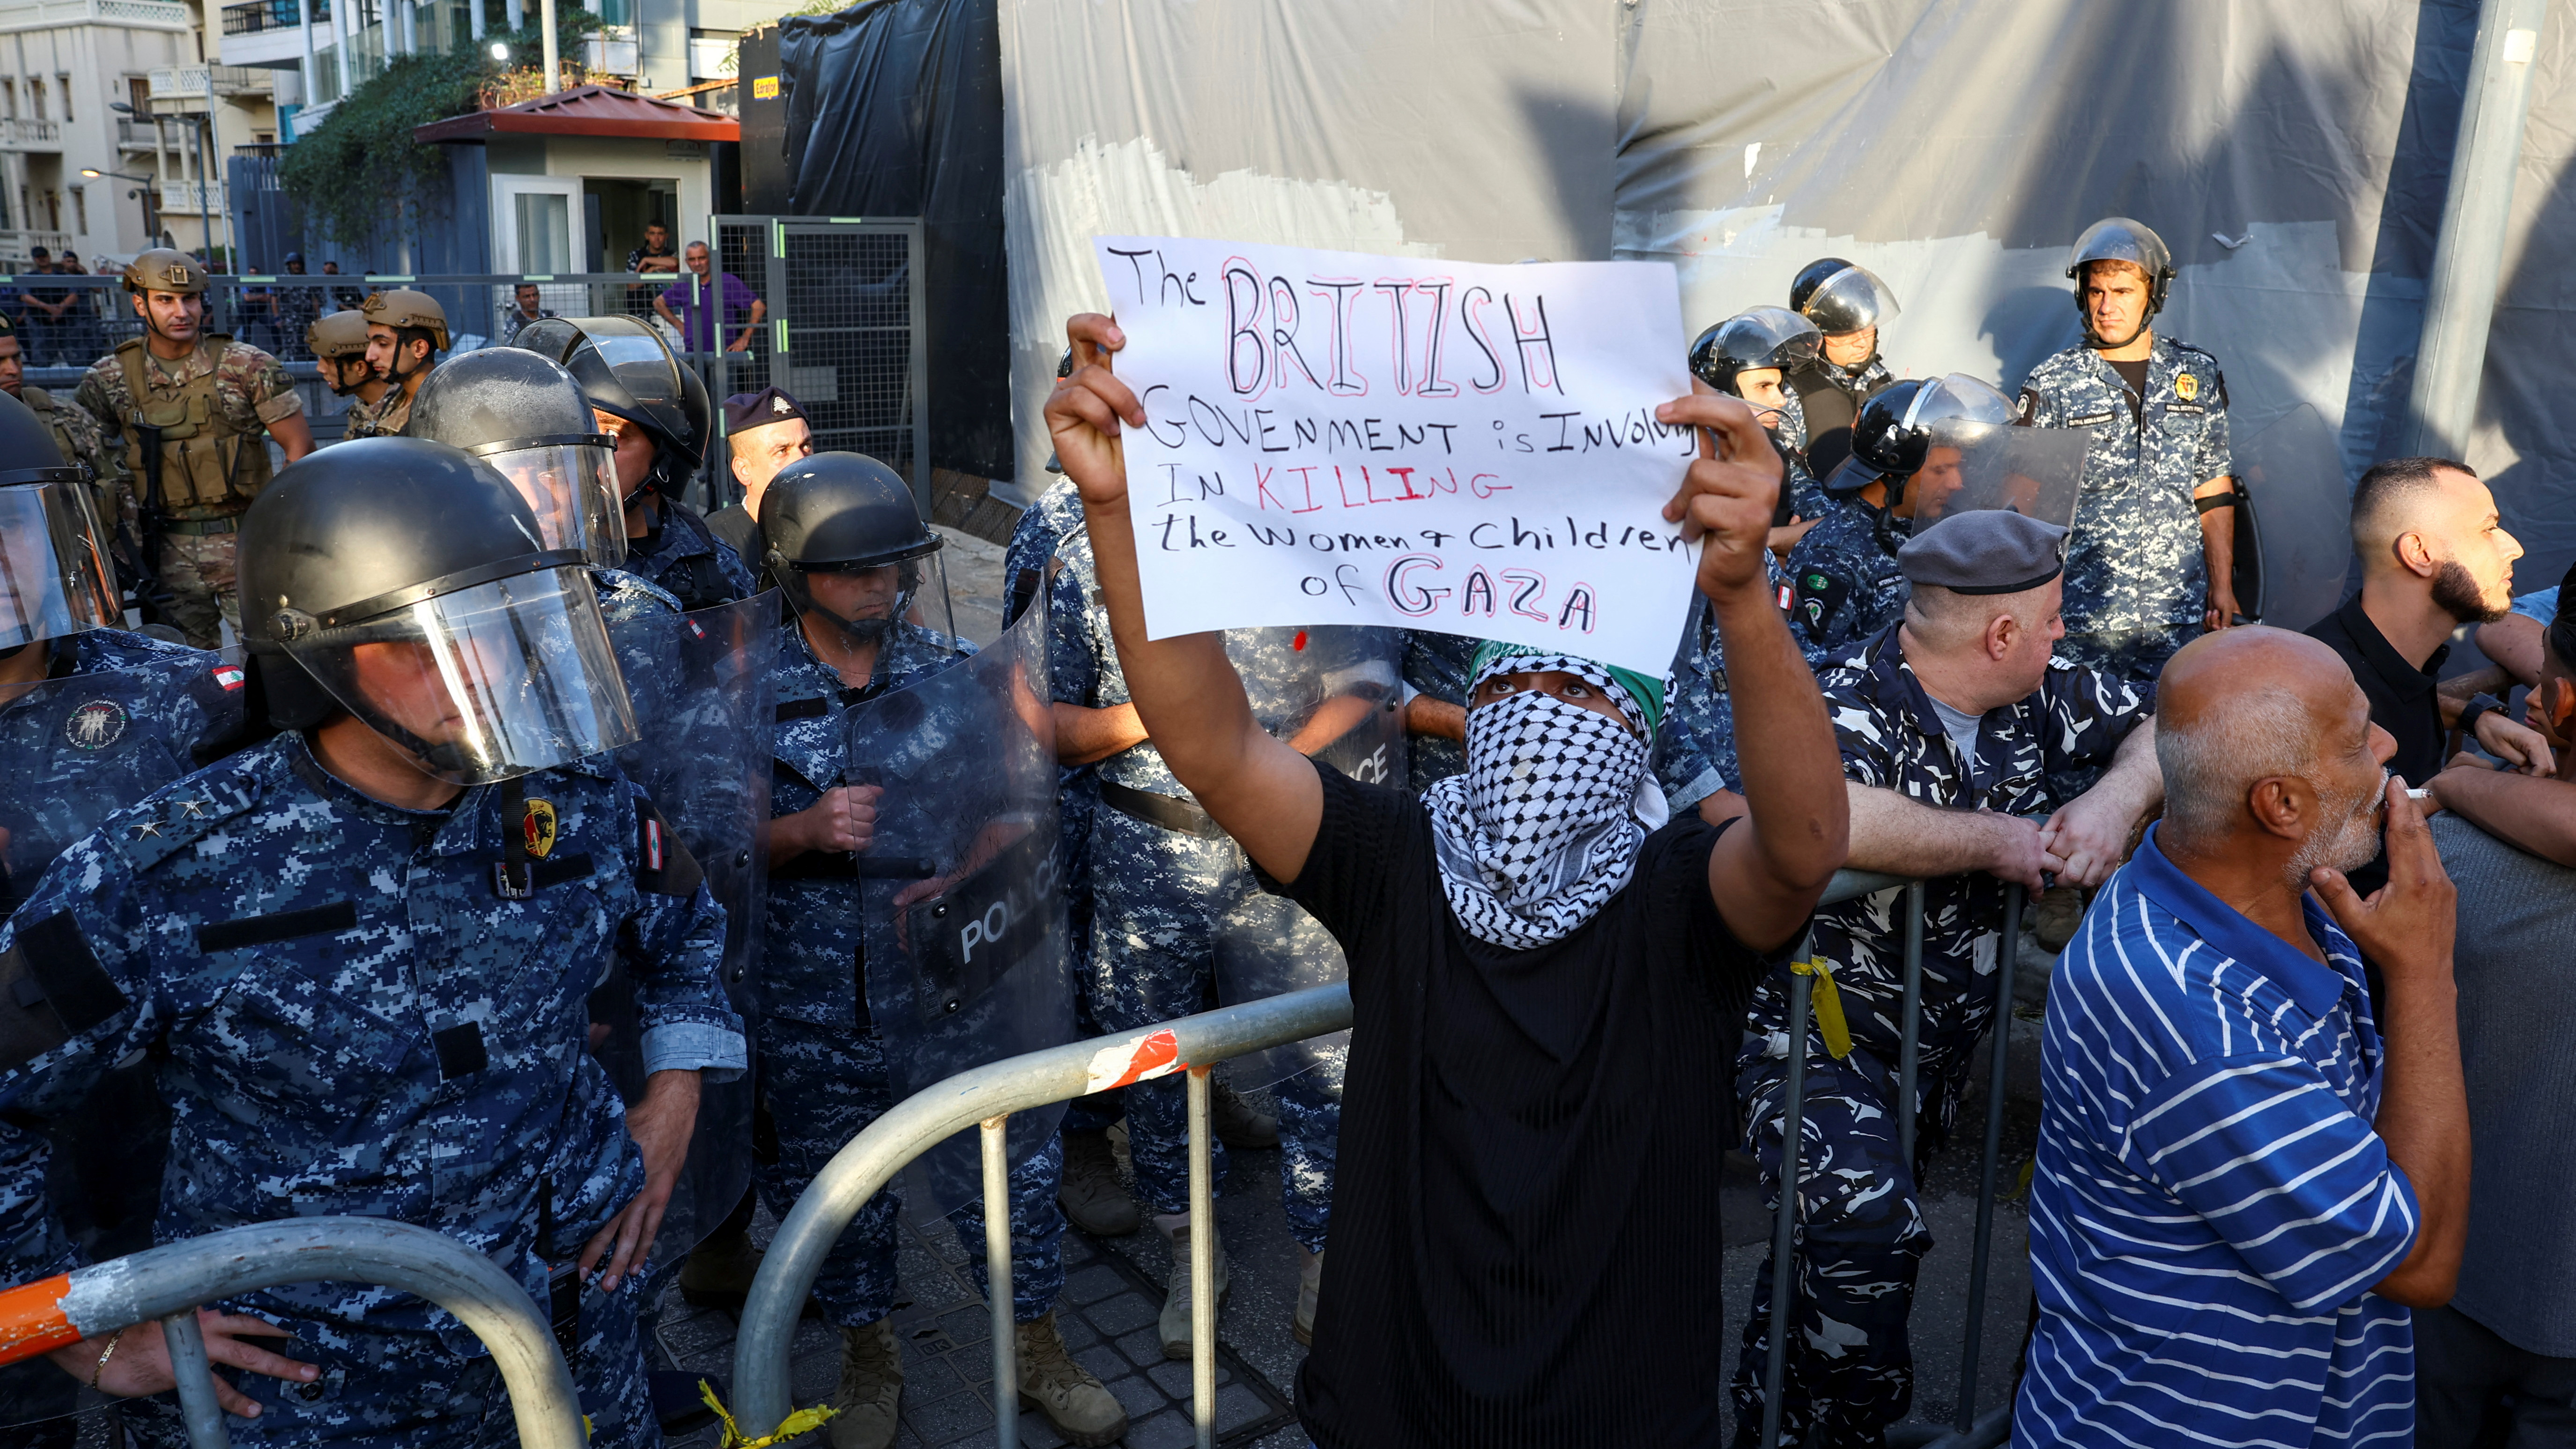 Demonstrators take part in a protest in support of Palestinians in Gaza as police stand guard near the British embassy in Beirut, Lebanon. /Esa Alexander/Reuters